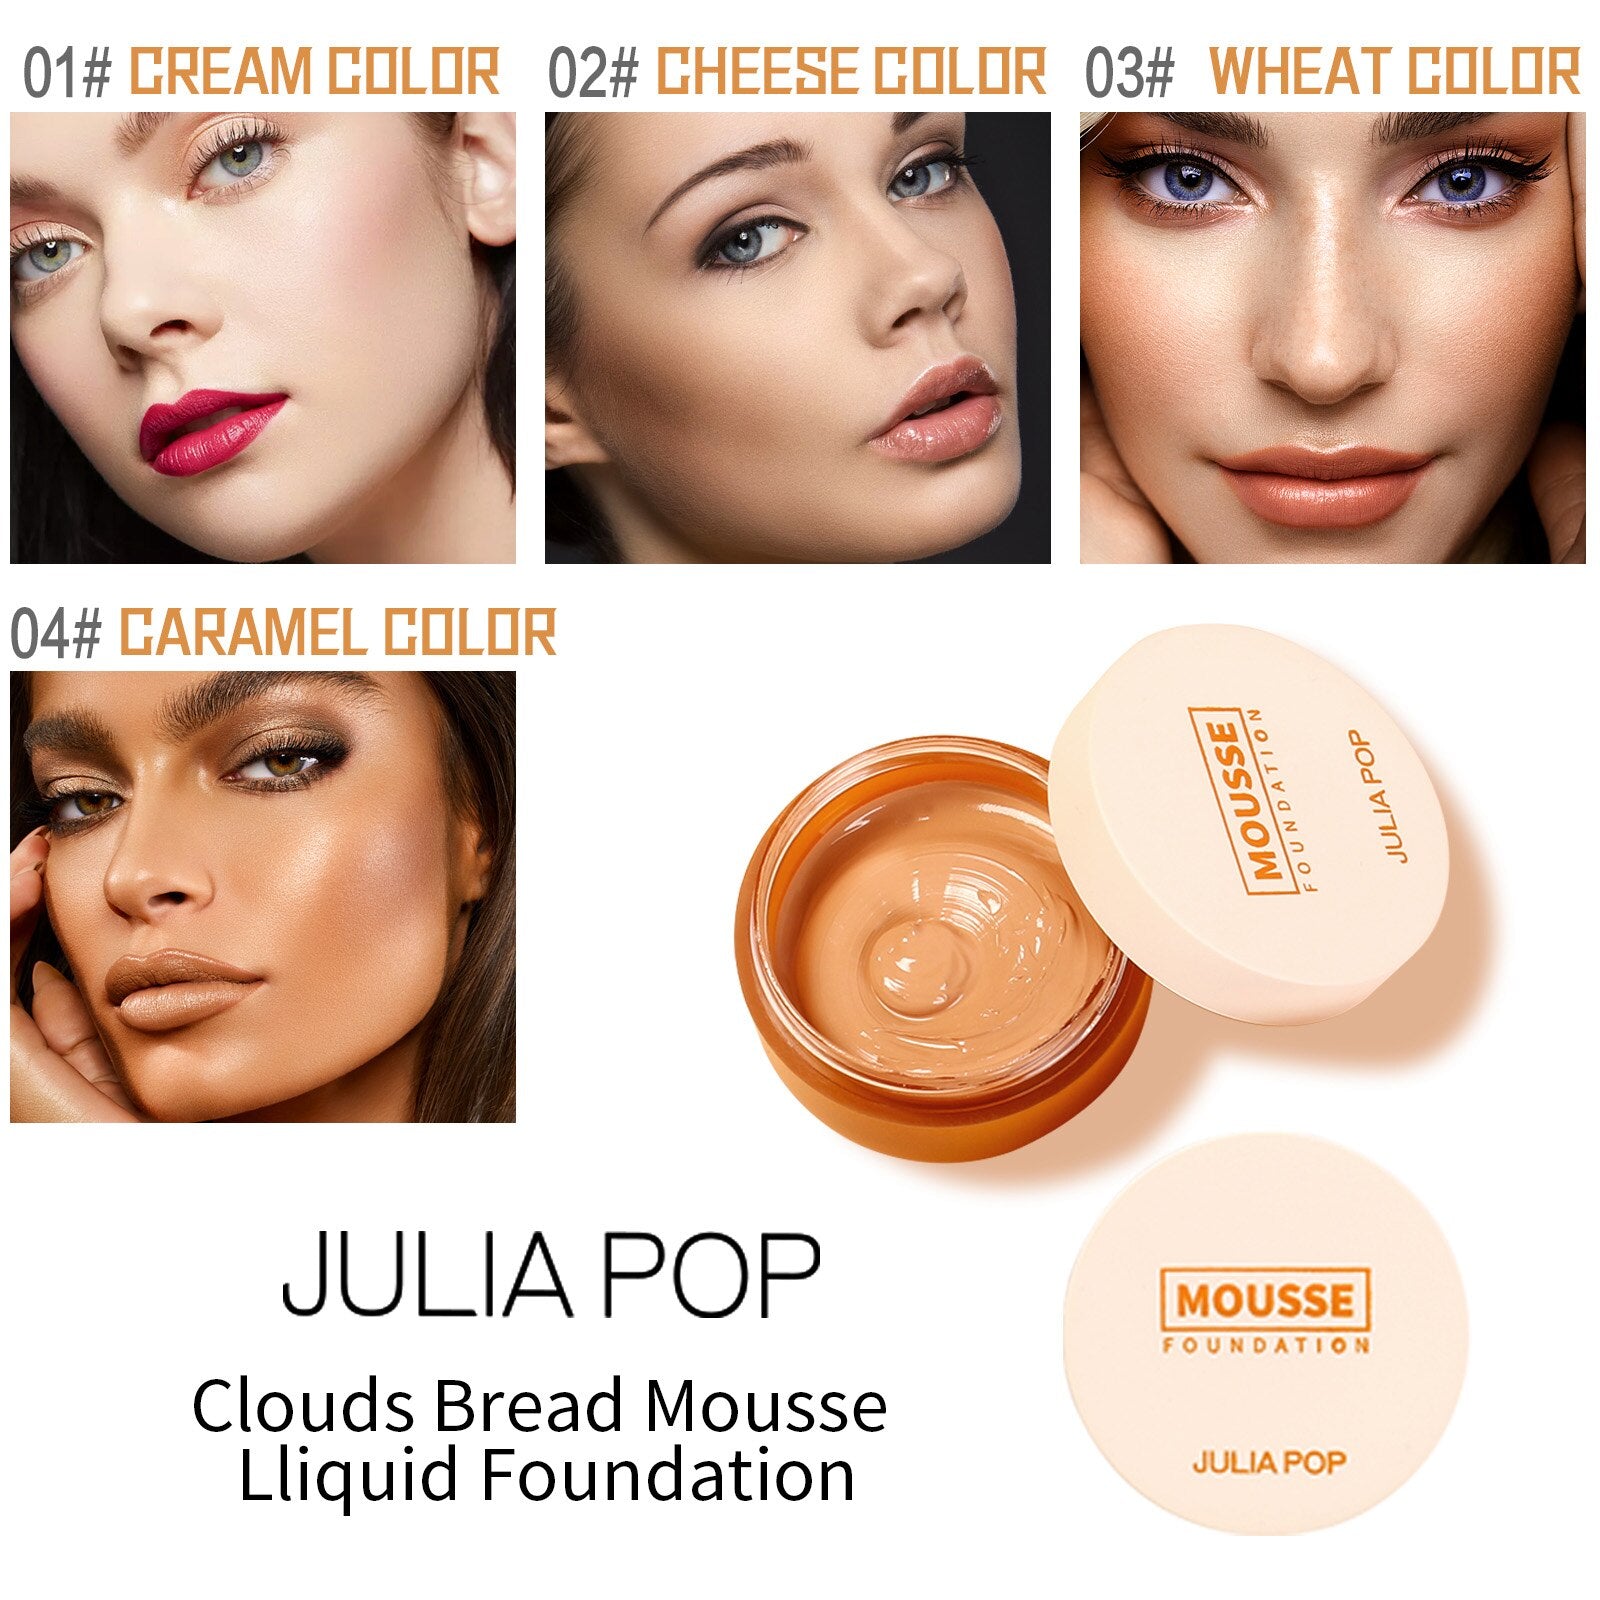 Clouds Bread Mousse Liquid Foundation Oil-control Moisturizing Smooth Long Lasting Waterproof Natural Facial Base Makeup Cream